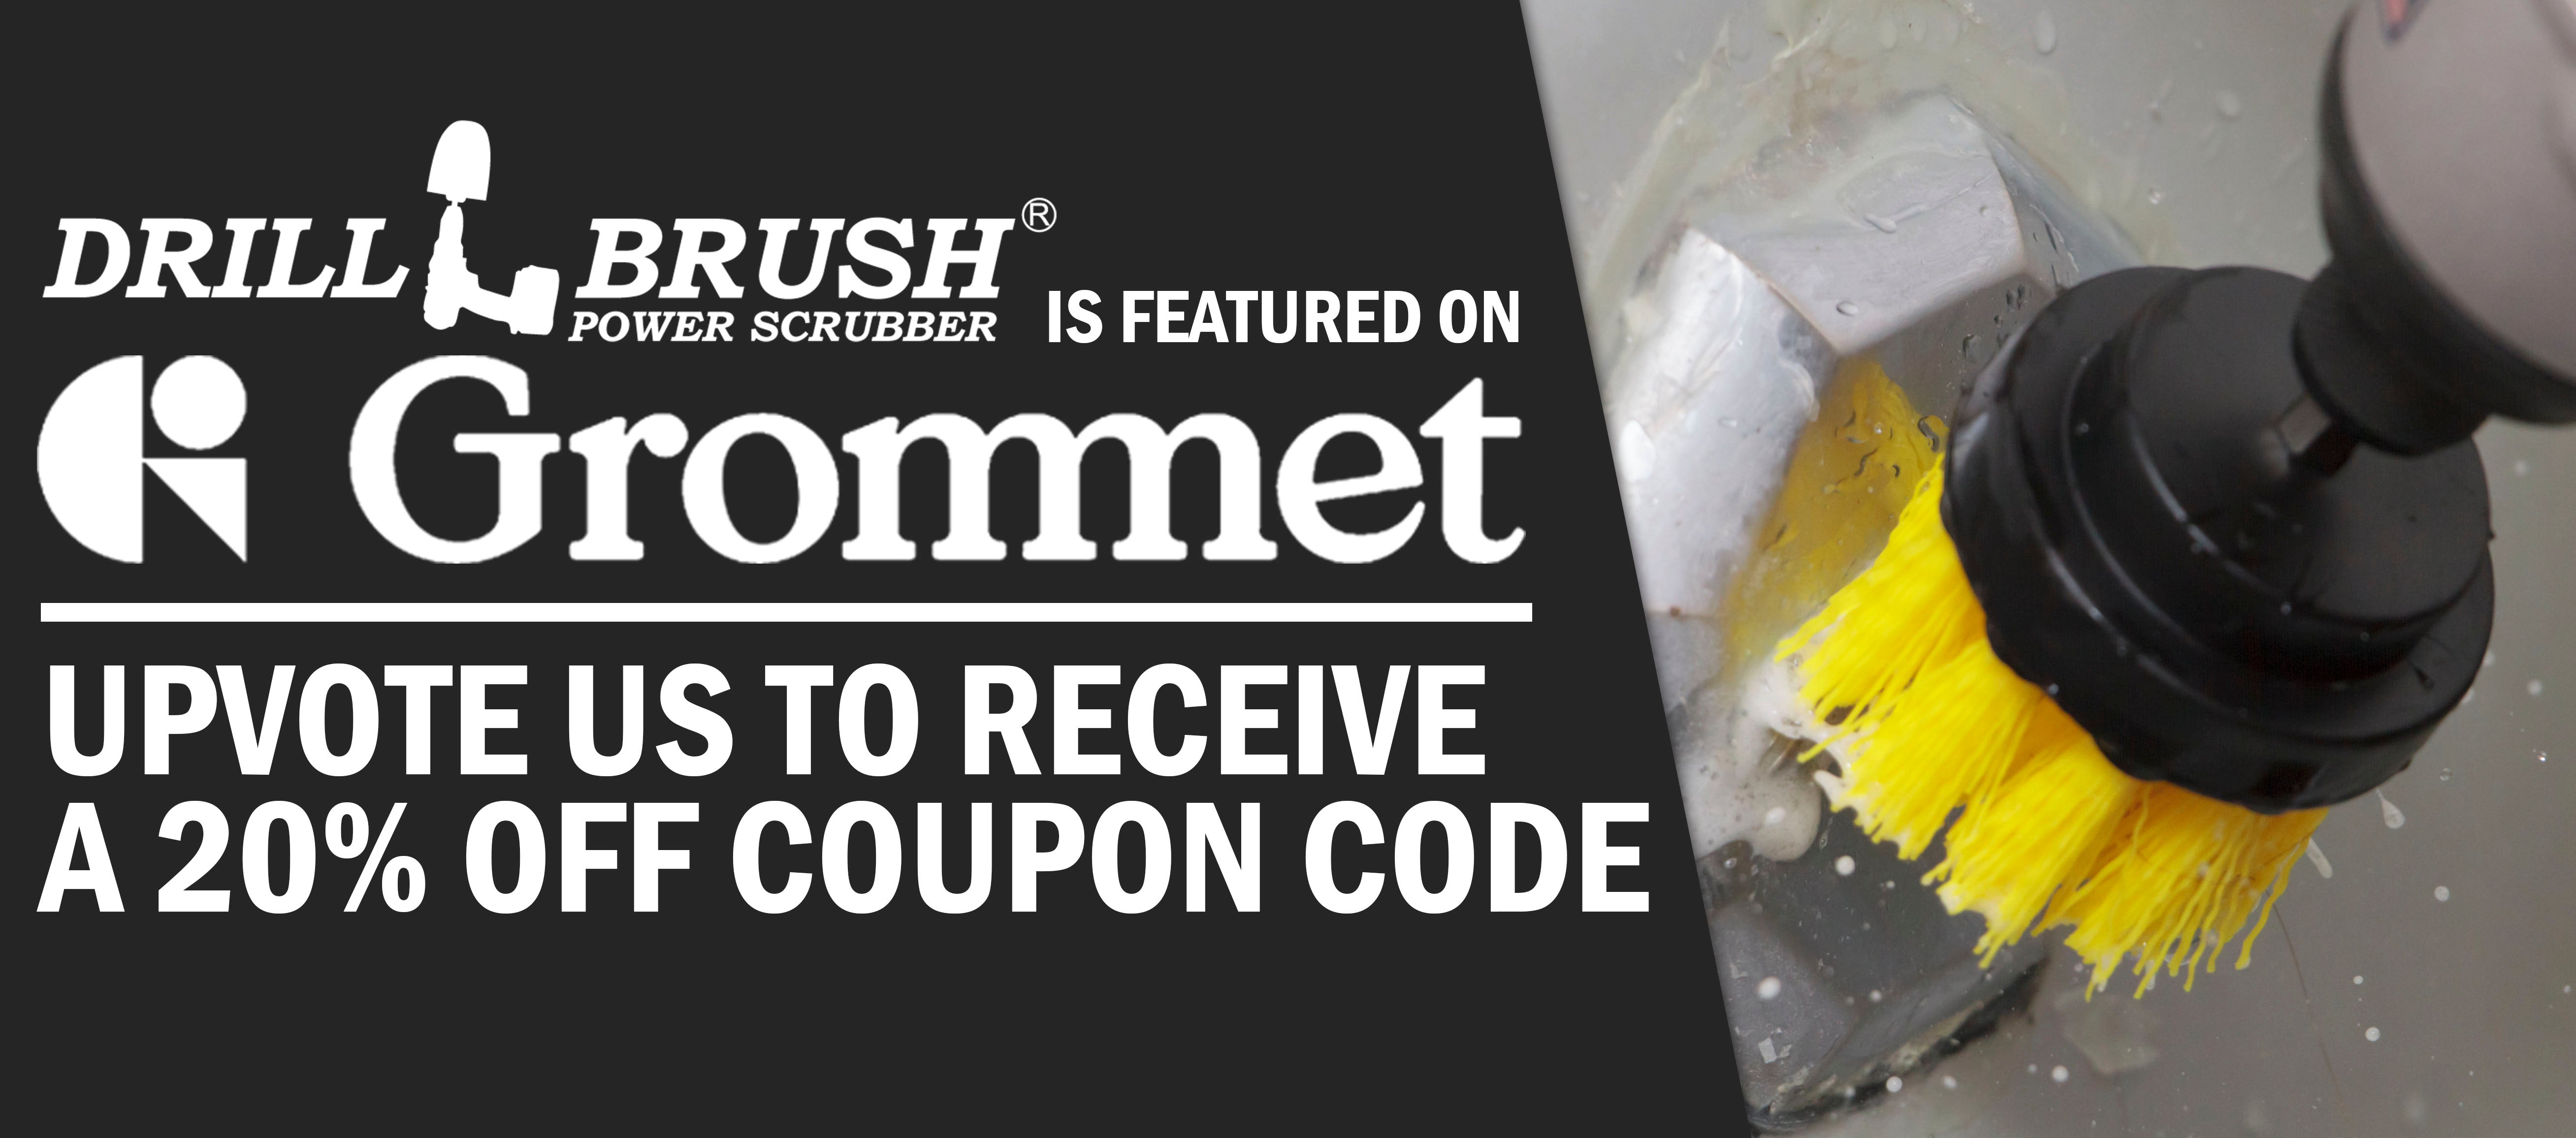 Drillbrush Launches On Grommet - Get a 20% Discount Code by Upvoting Drillbrush